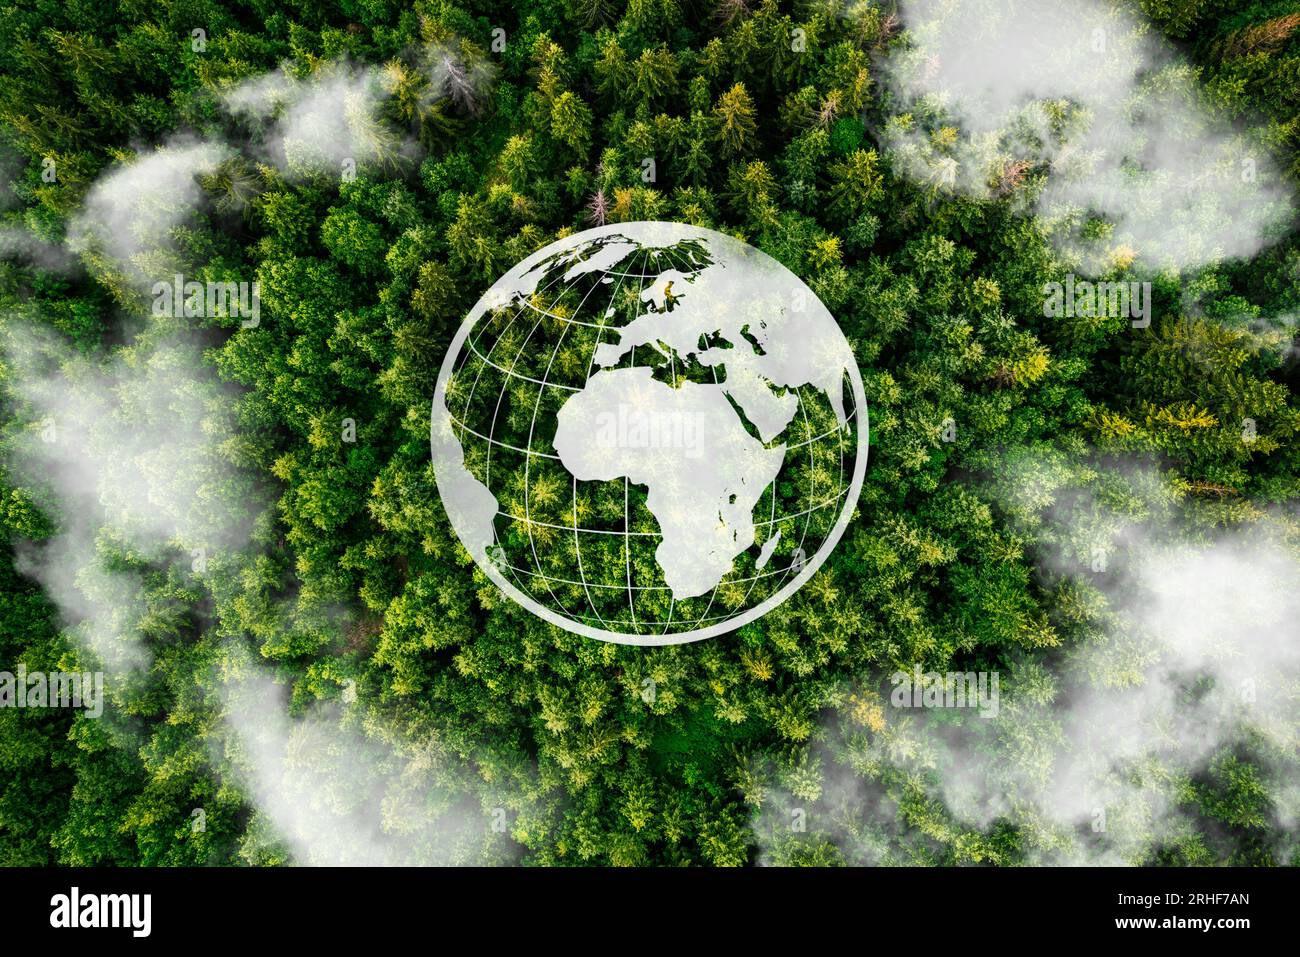 Recycle and Zero waste symbol in the middle of a beautiful untouched jungle for Sustainable environment development goals. Stock Photo